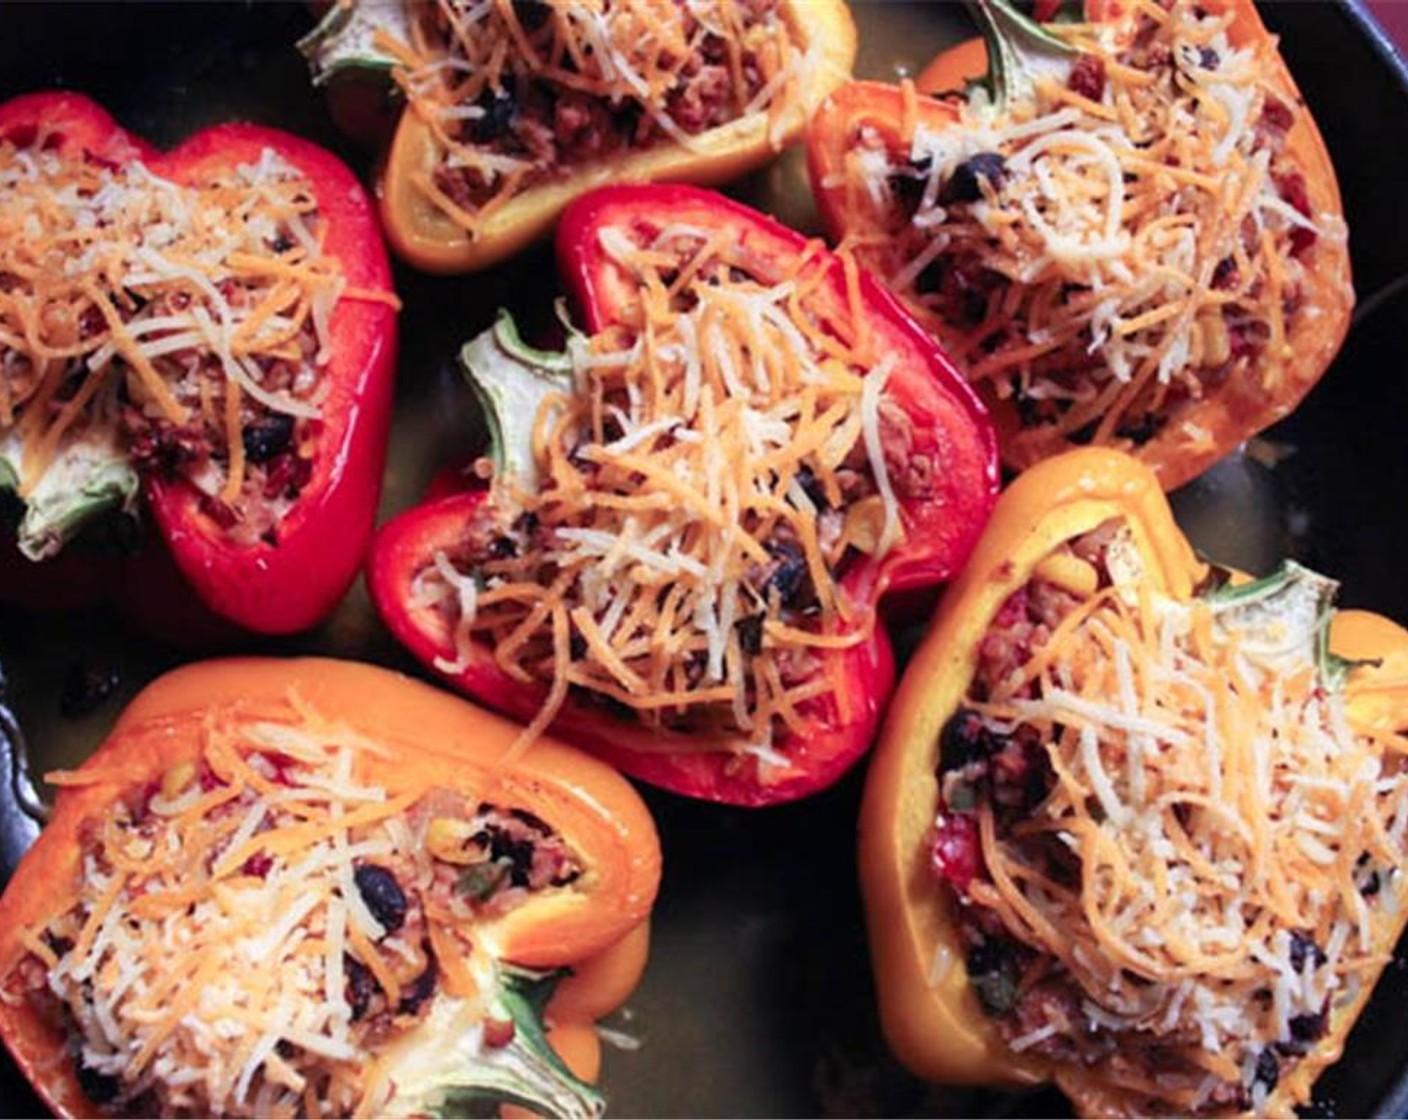 step 12 Remove the foil from your baking dish. Combine the Monterey jack and cheddar cheeses and sprinkle the mixture on top of each stuffed pepper. Bake the peppers uncovered for another five minutes until the cheese is melted and bubbling.